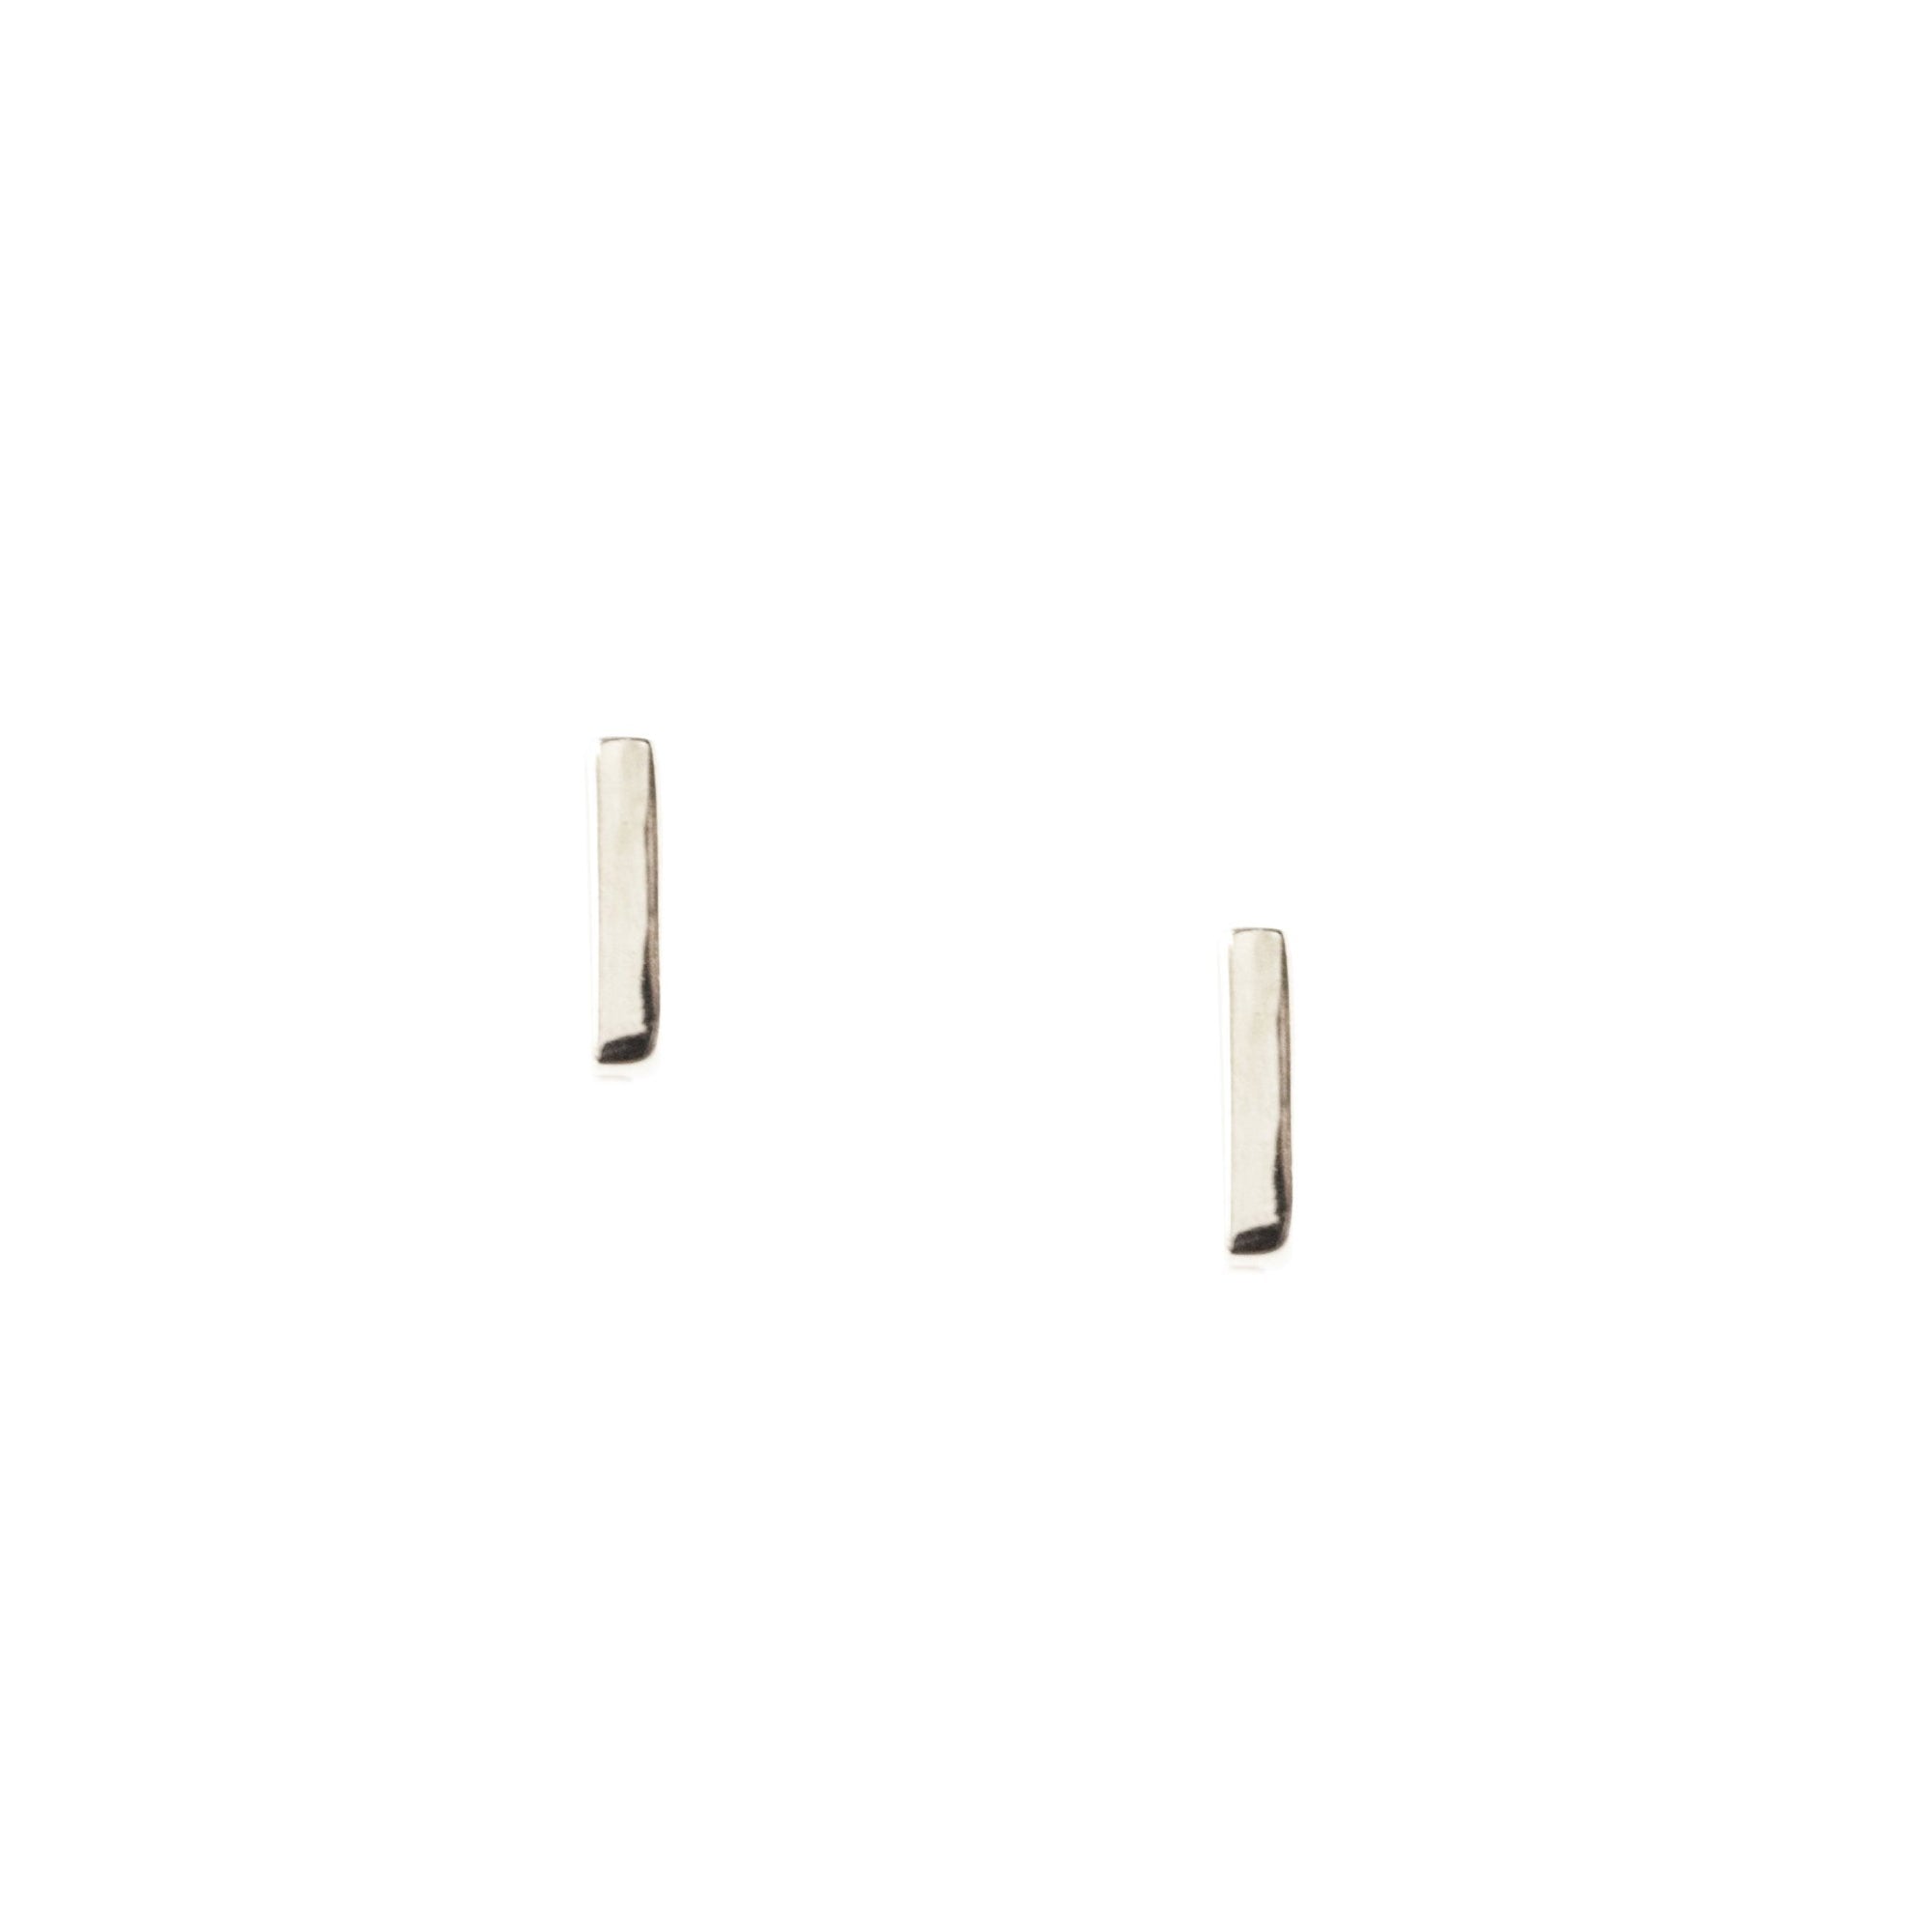 TINY POISE BAR STUDS - SILVER - SO PRETTY CARA COTTER